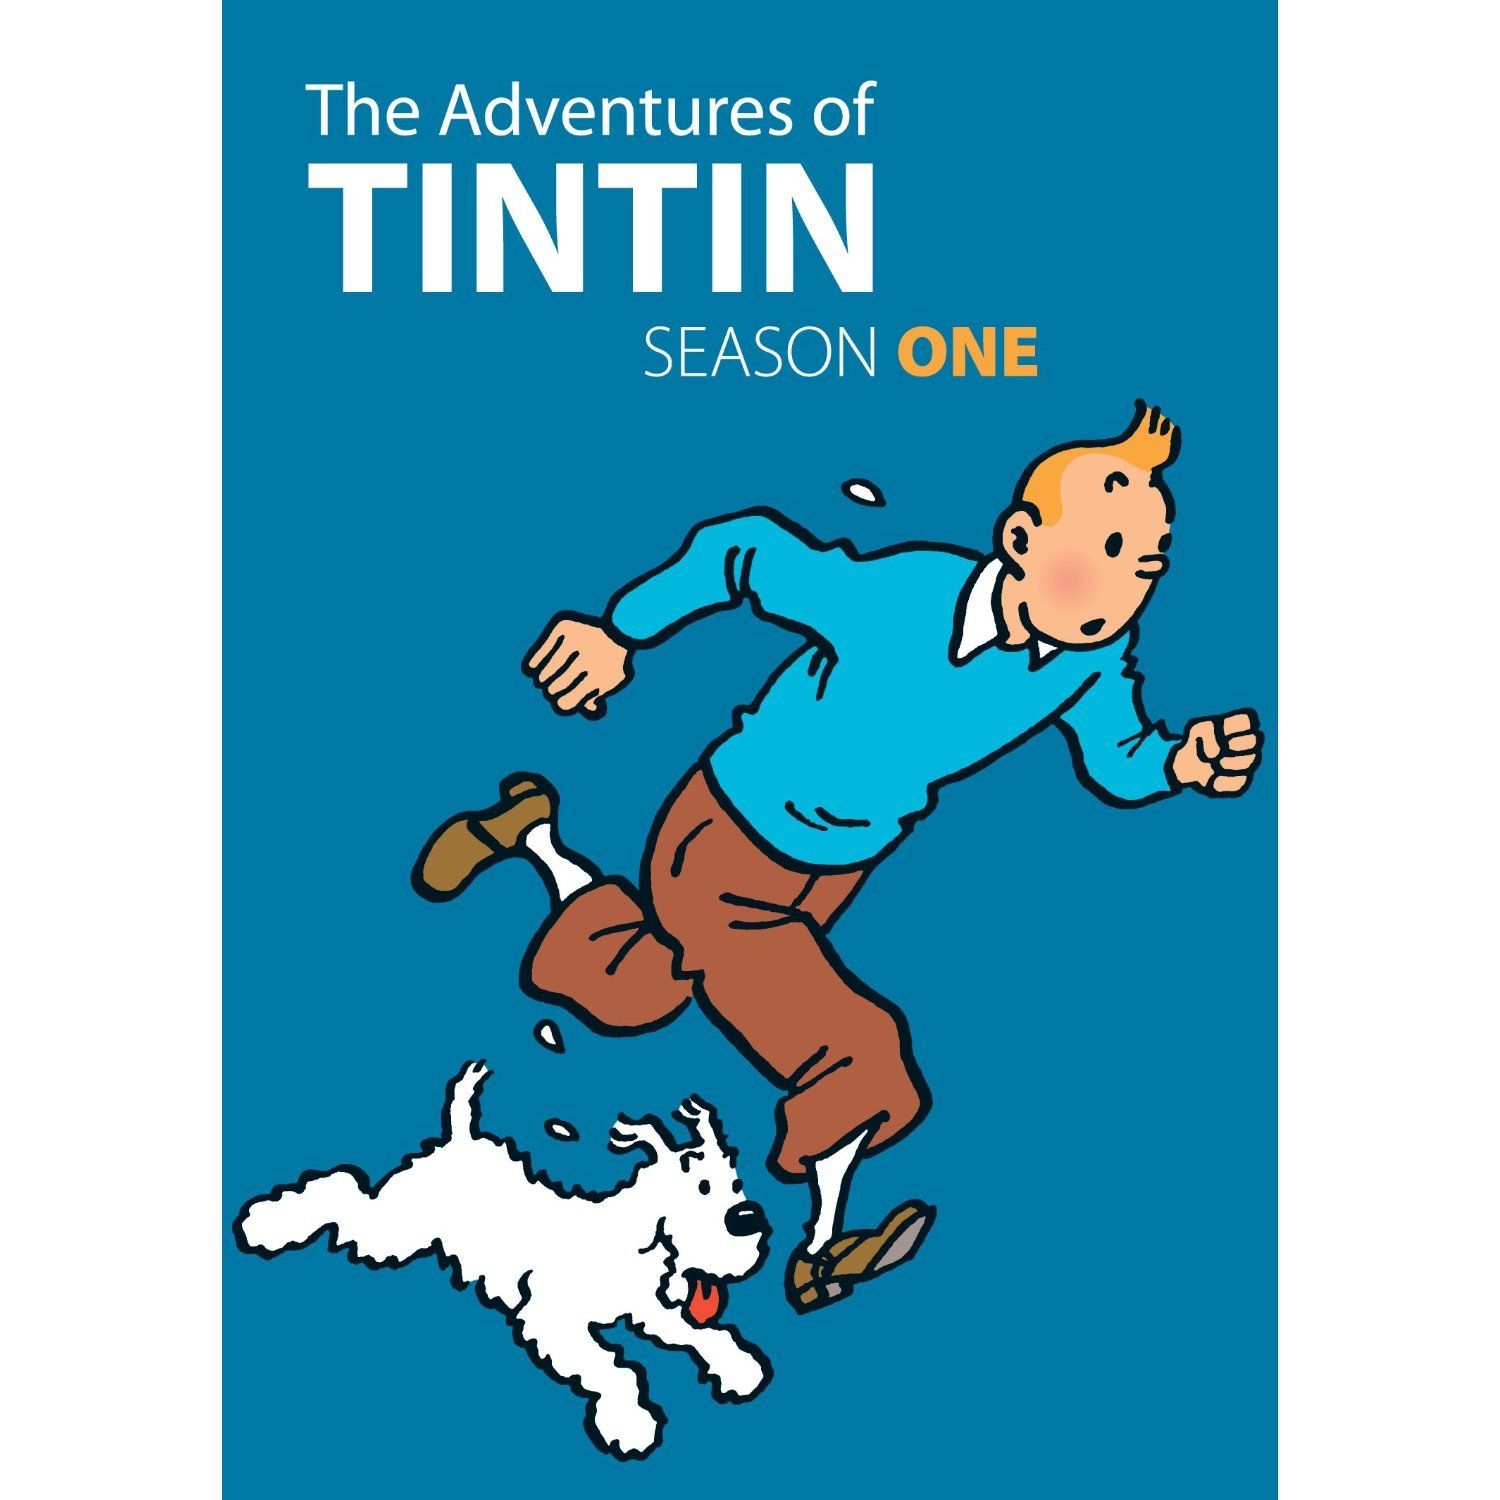 The Adventures Of Tintin Wallpapers